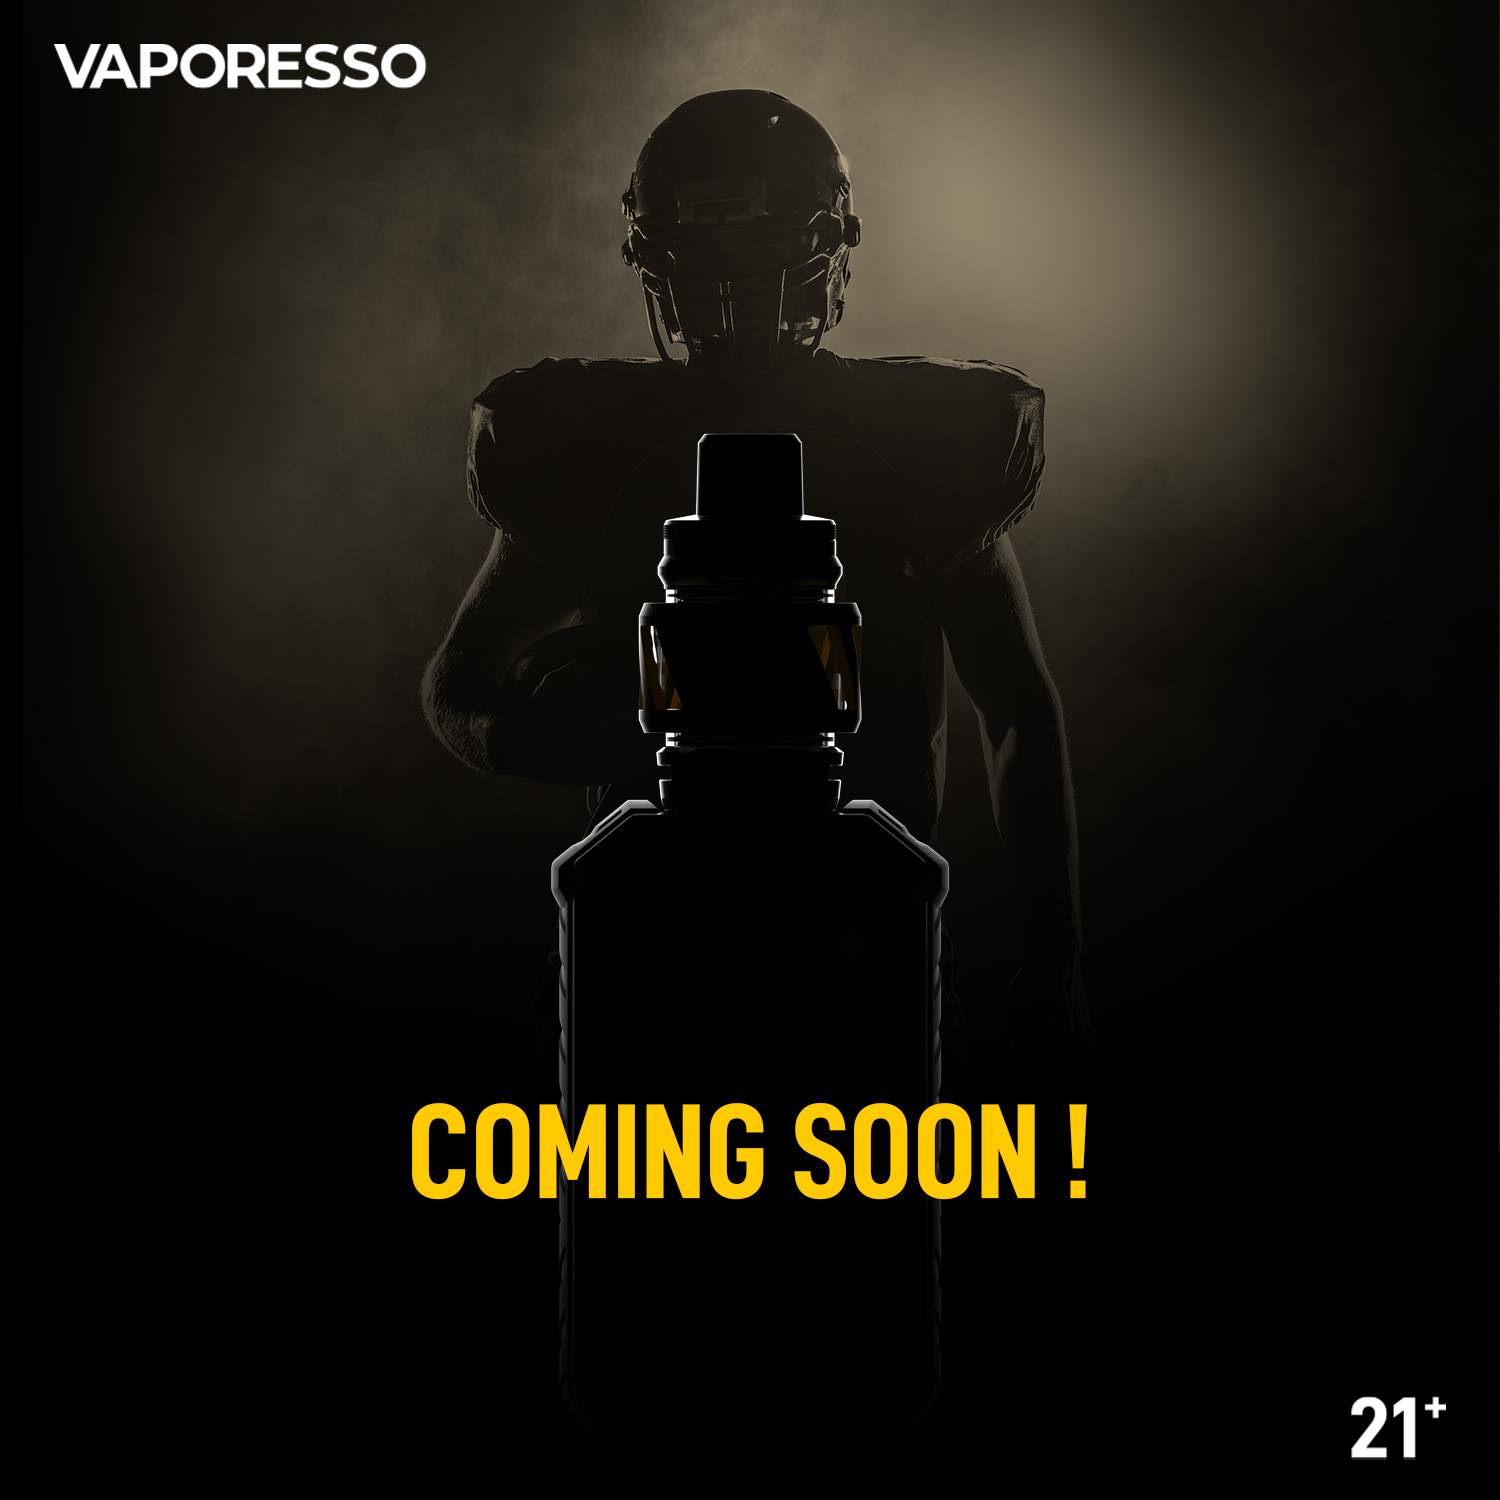 Vaporesso’s Vaping Expedition: Navigating the High Seas of Flavorful Adventures